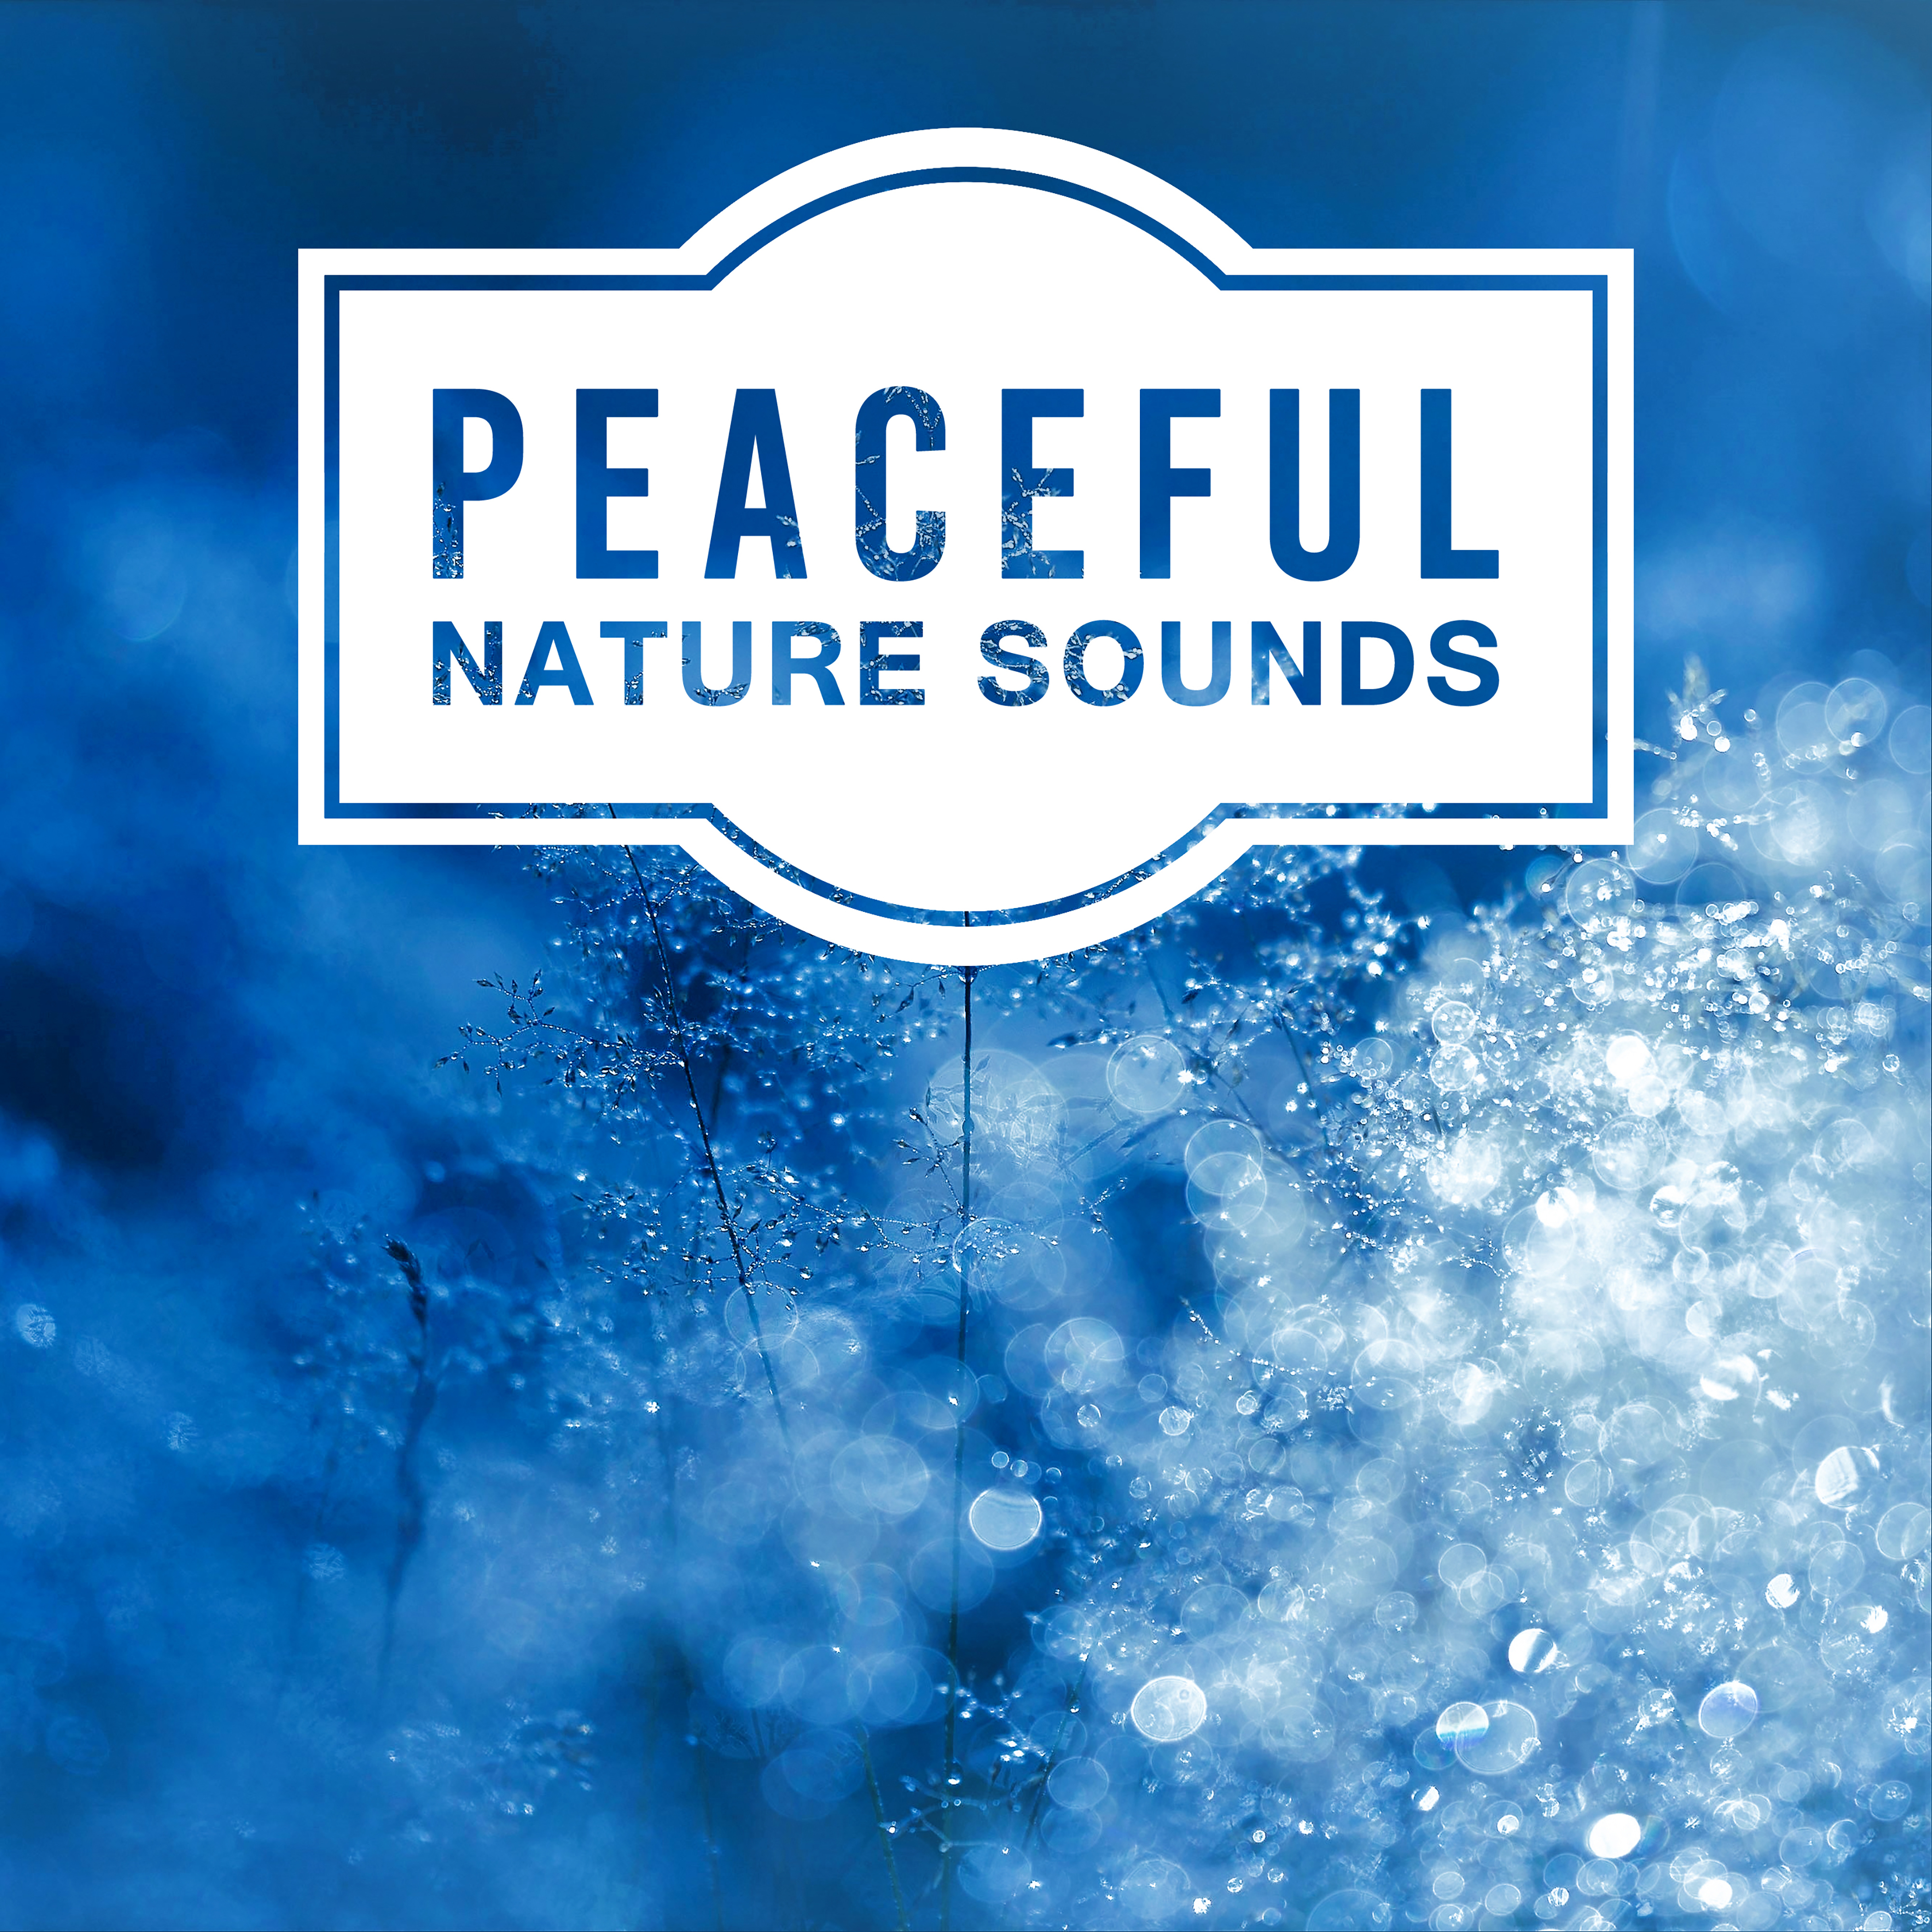 Peaceful Nature Sounds  New Age Music for Relaxation, Pure Waves, Healing Water, Sounds of Sea, Soft Music to Rest, Calm Down